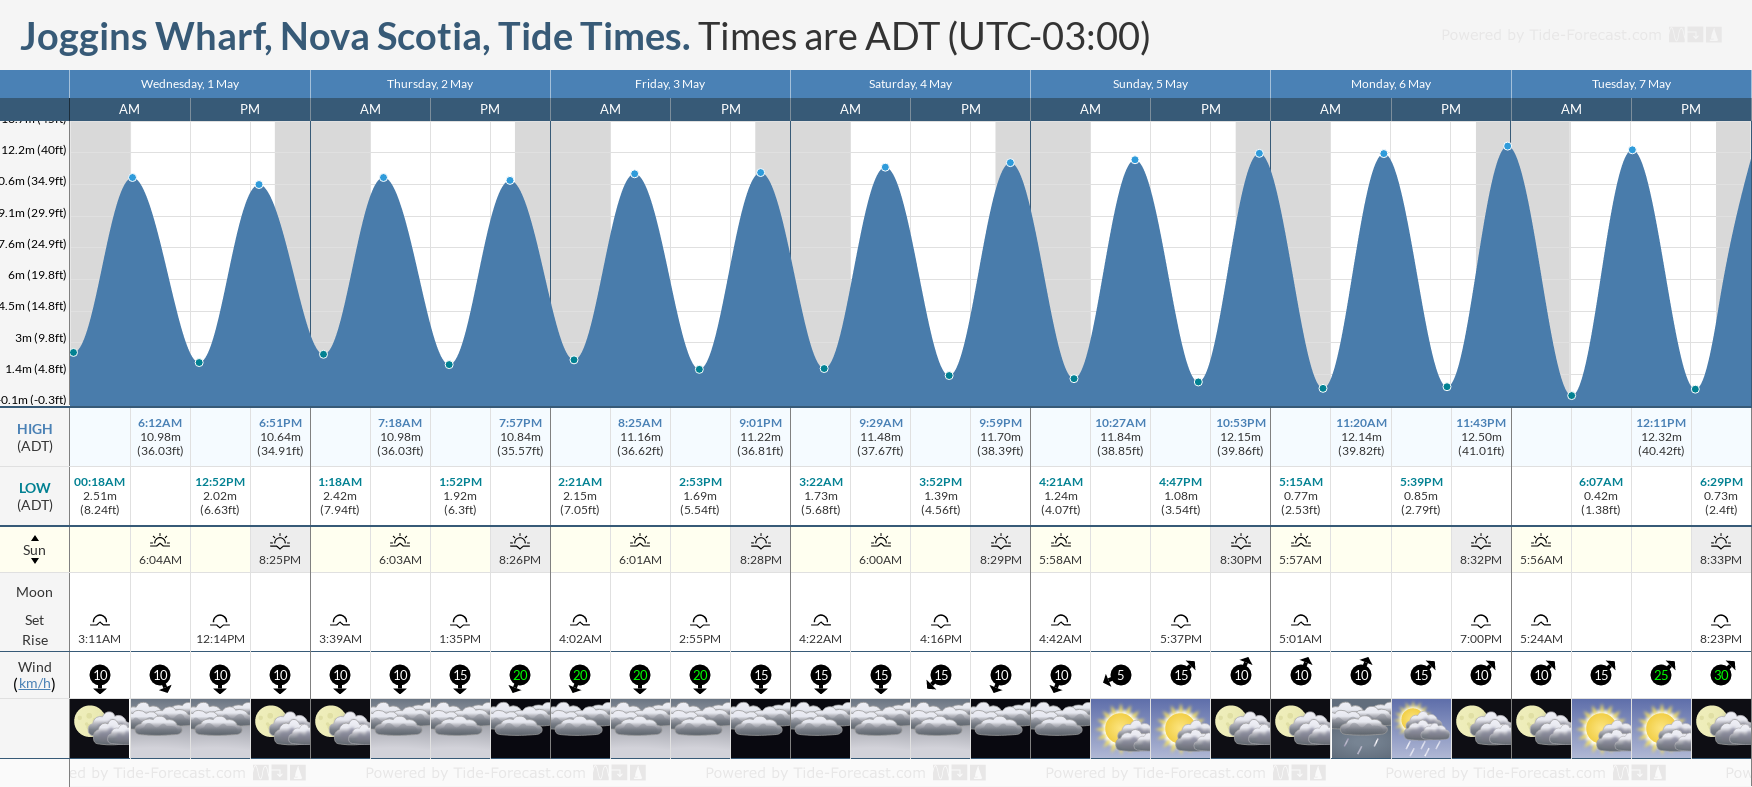 Joggins Wharf, Nova Scotia Tide Chart including high and low tide tide times for the next 7 days